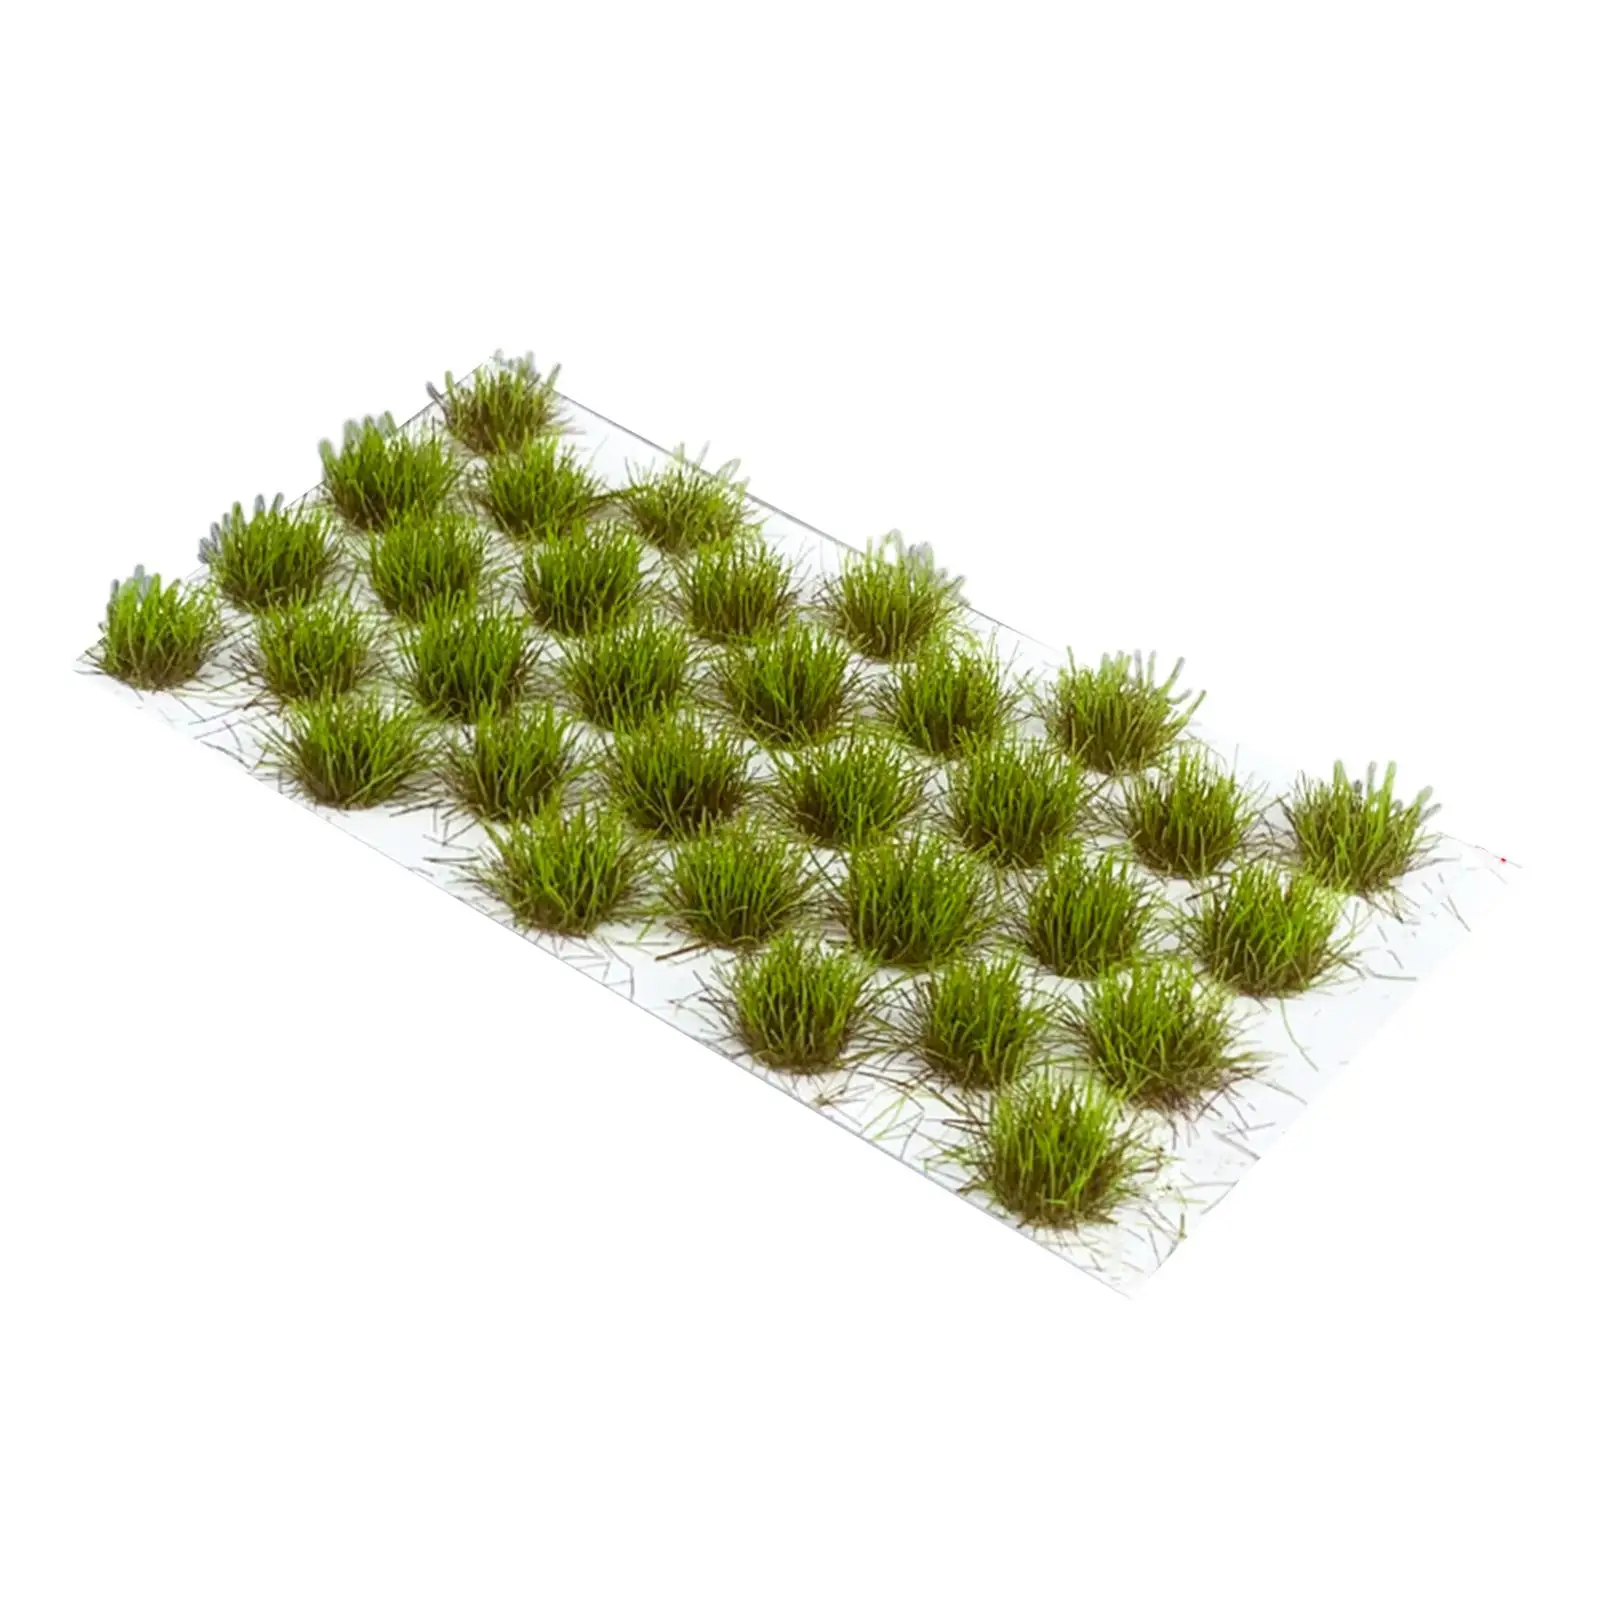 Self Adhesive Grass Tufts Grass groups Diorama Layout Scenery Miniature Artificial Grass for Desk Decor